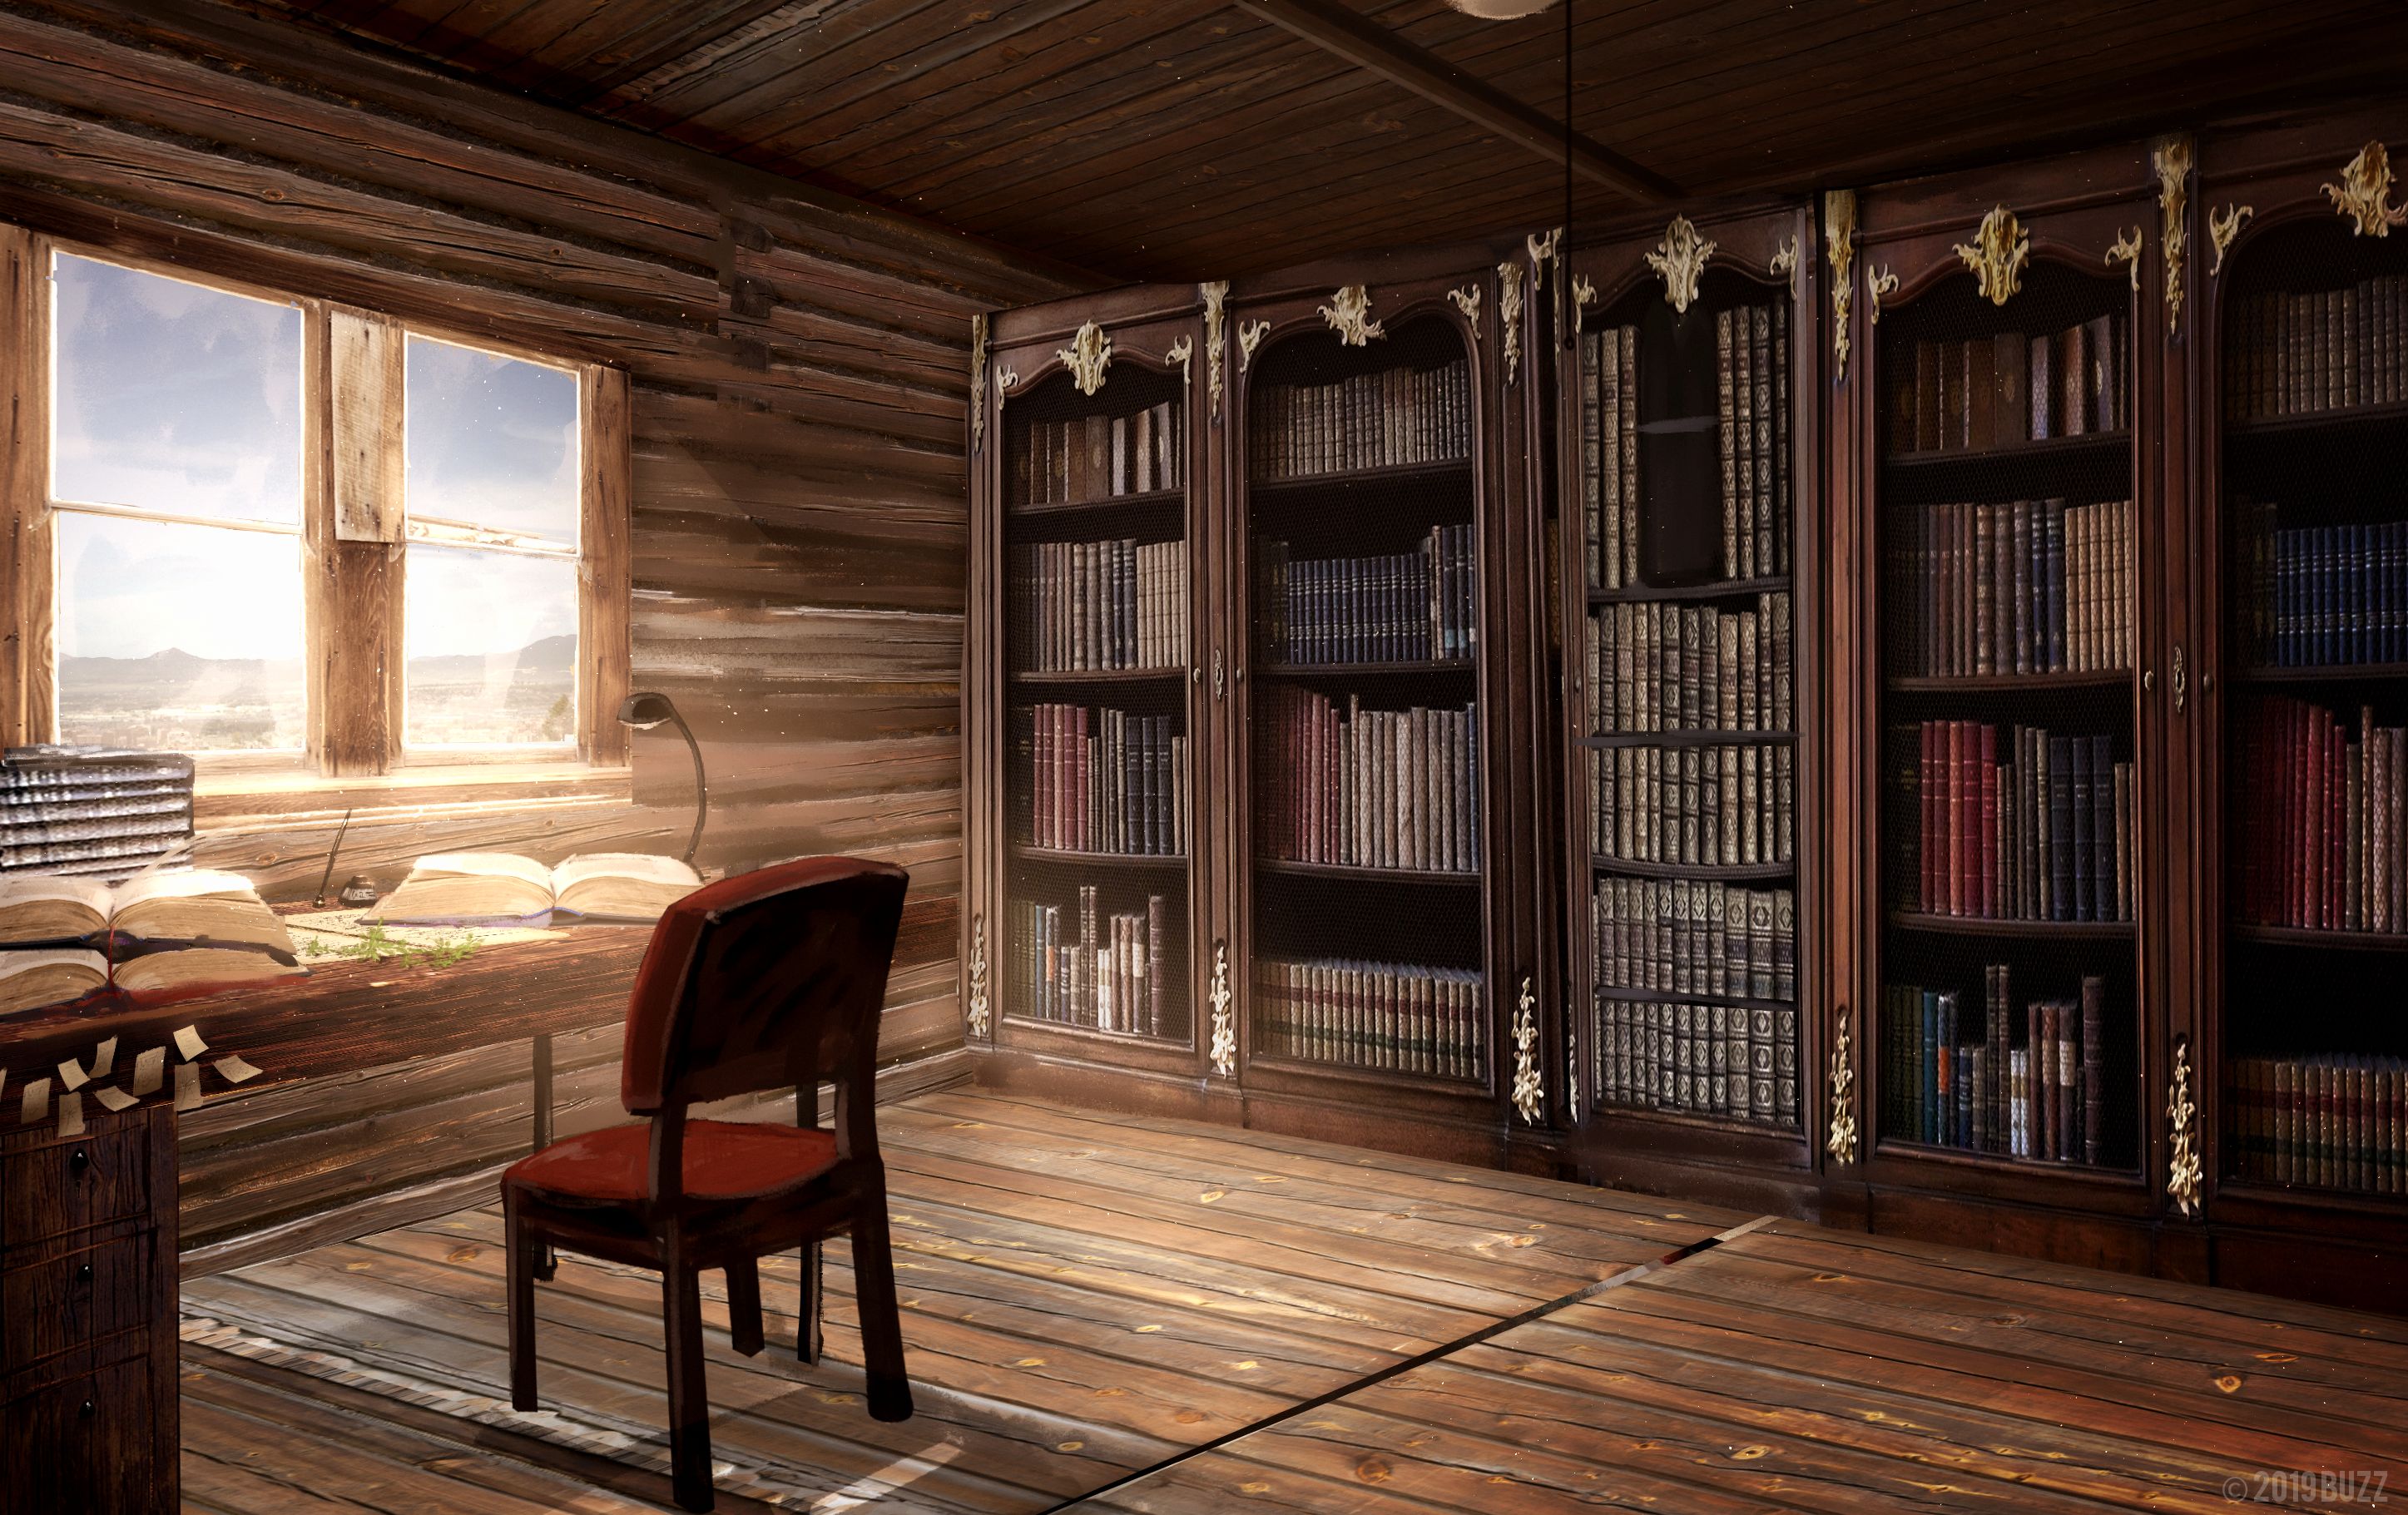 library, anime, book, chair, desk, window, wooden